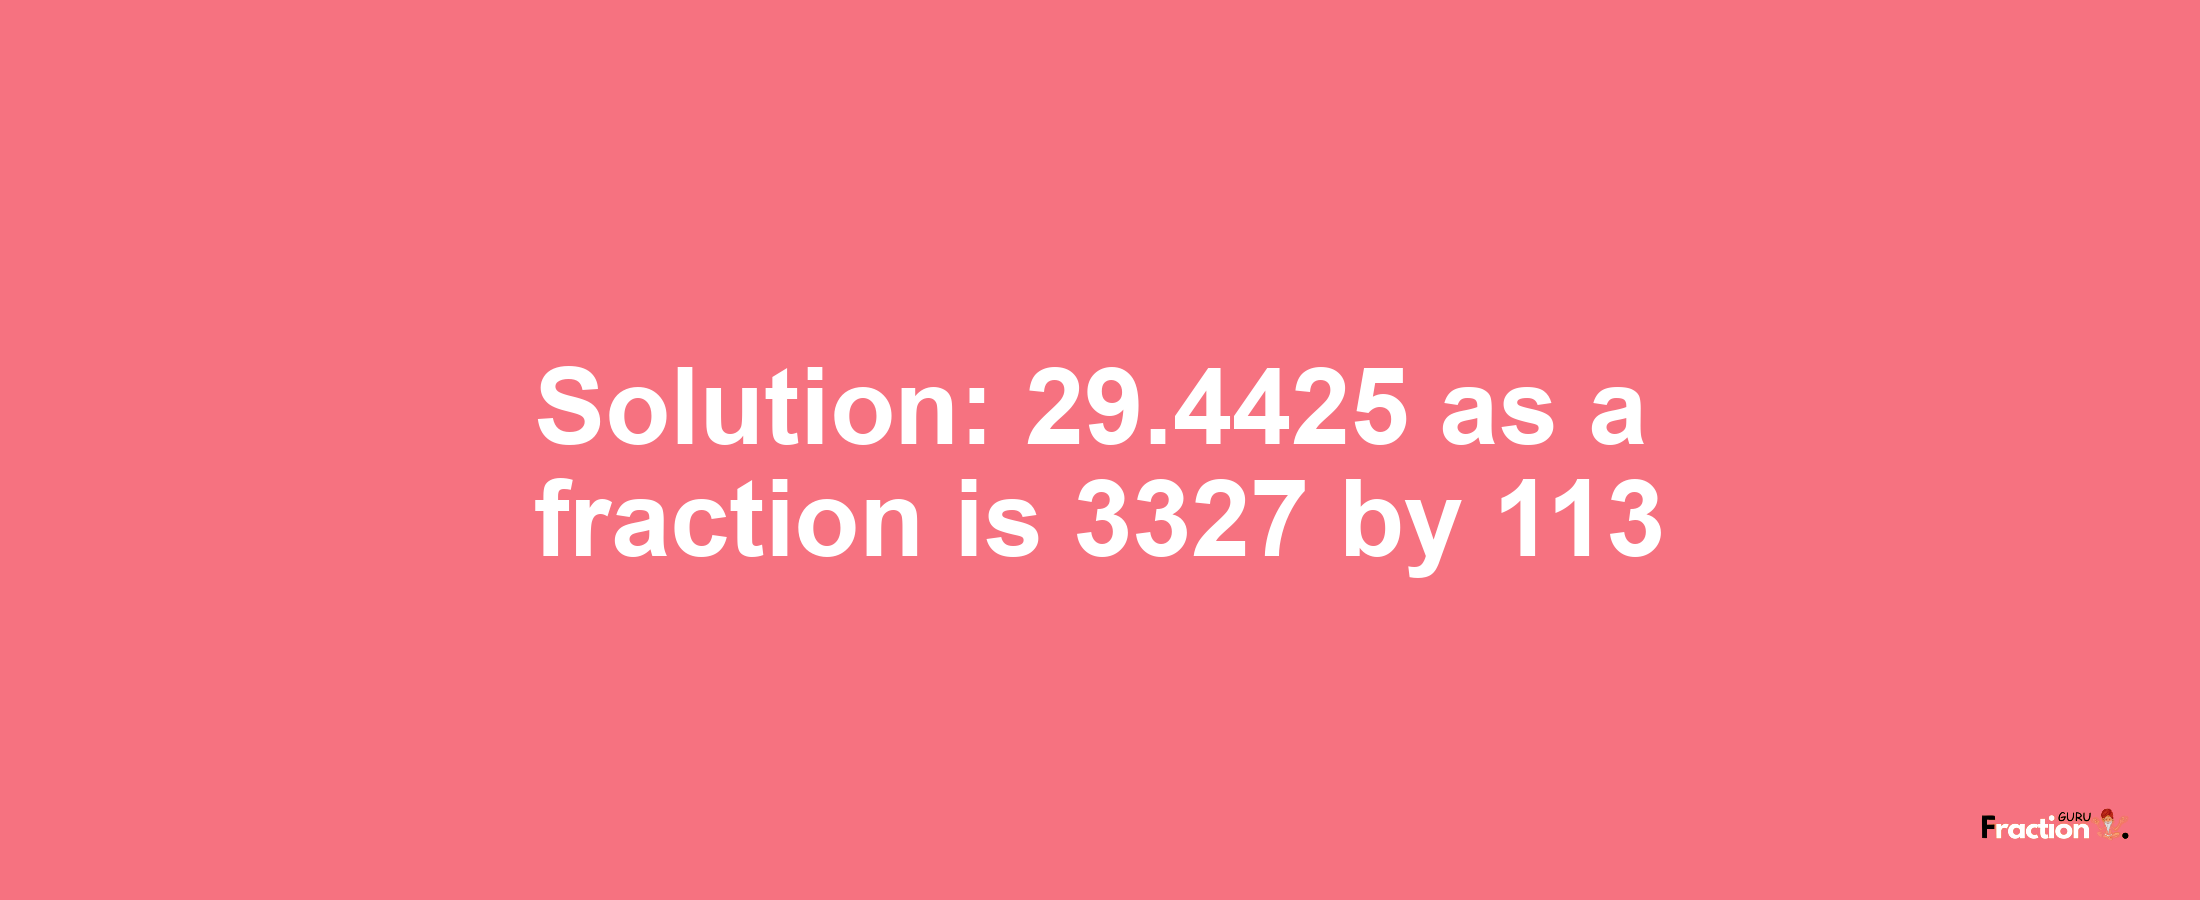 Solution:29.4425 as a fraction is 3327/113